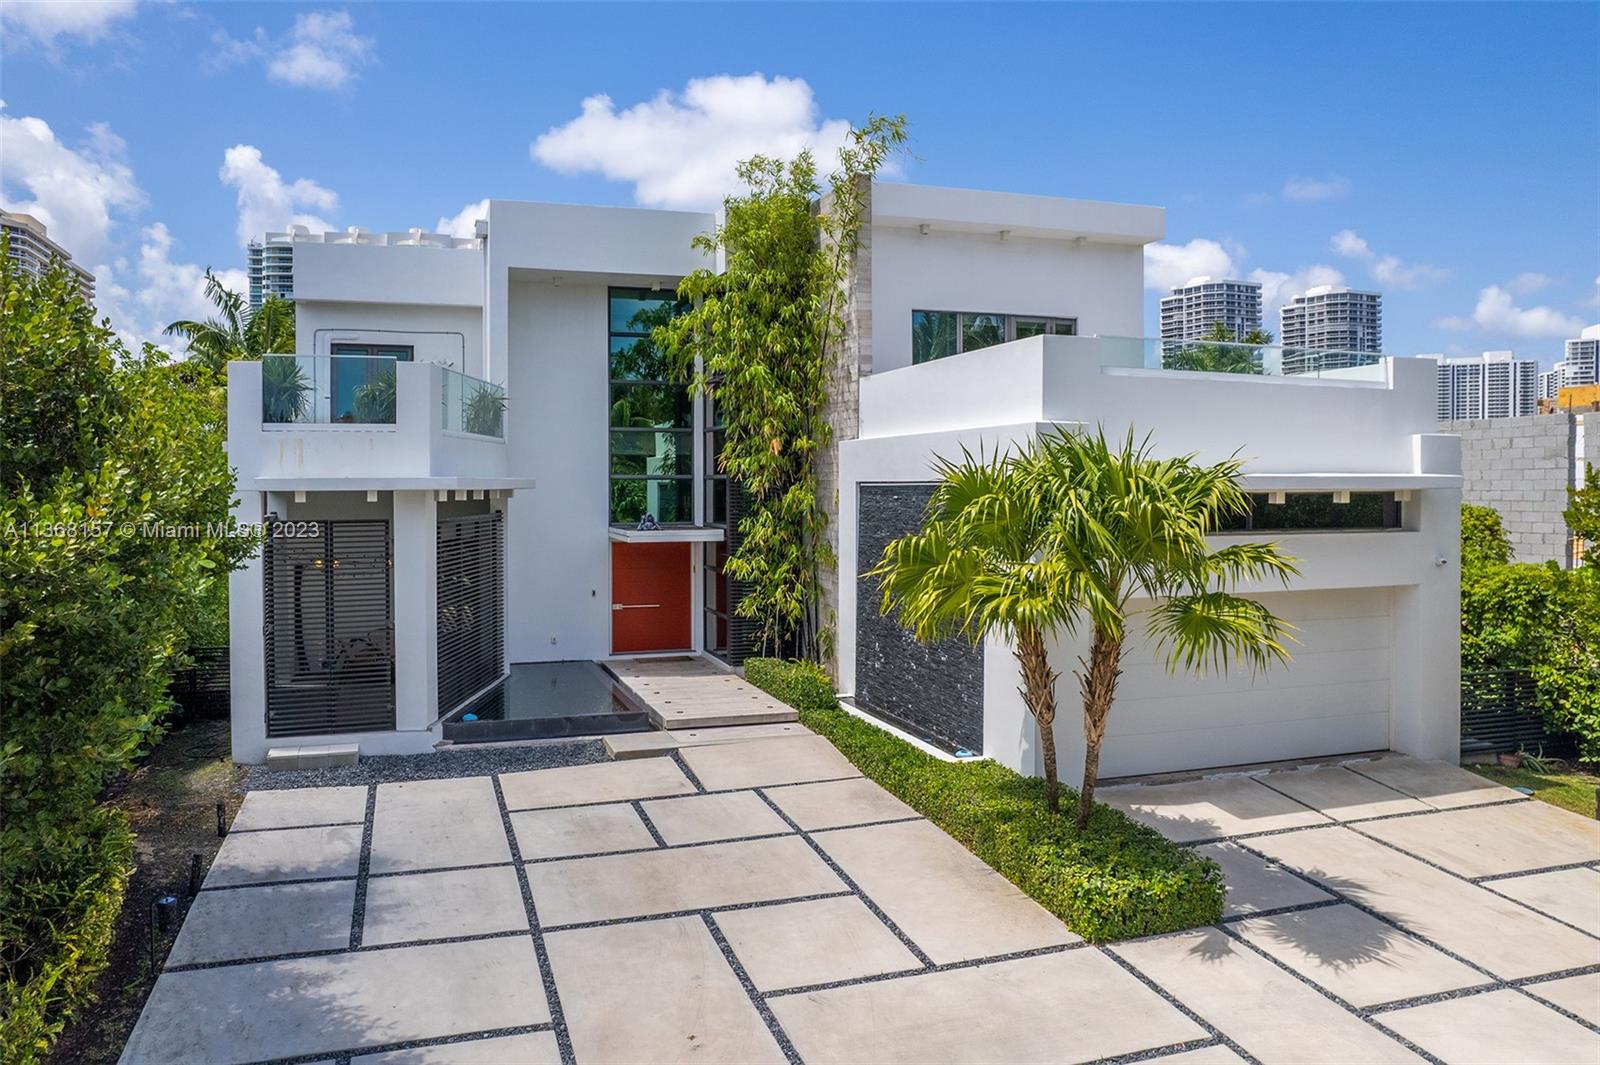 Introducing one of the most stunning homes in the prime location of Golden Beach, FL. This modern masterpiece boasts 75 feet of waterfront and a spacious open floor plan that seamlessly integrates indoor and outdoor living. The turnkey, move-in ready home was built in 2015 and features 5 oversized bedrooms, each with their own en-suite bathroom. The property is just a short walk away from the private beach, perfect for those who enjoy the sun, sand, and surf. With its impeccable design and luxurious finishes, this home is the perfect oasis for those seeking the ultimate in comfort and style. Don't miss out on the opportunity to own one of the most amazing homes in Golden Beach.